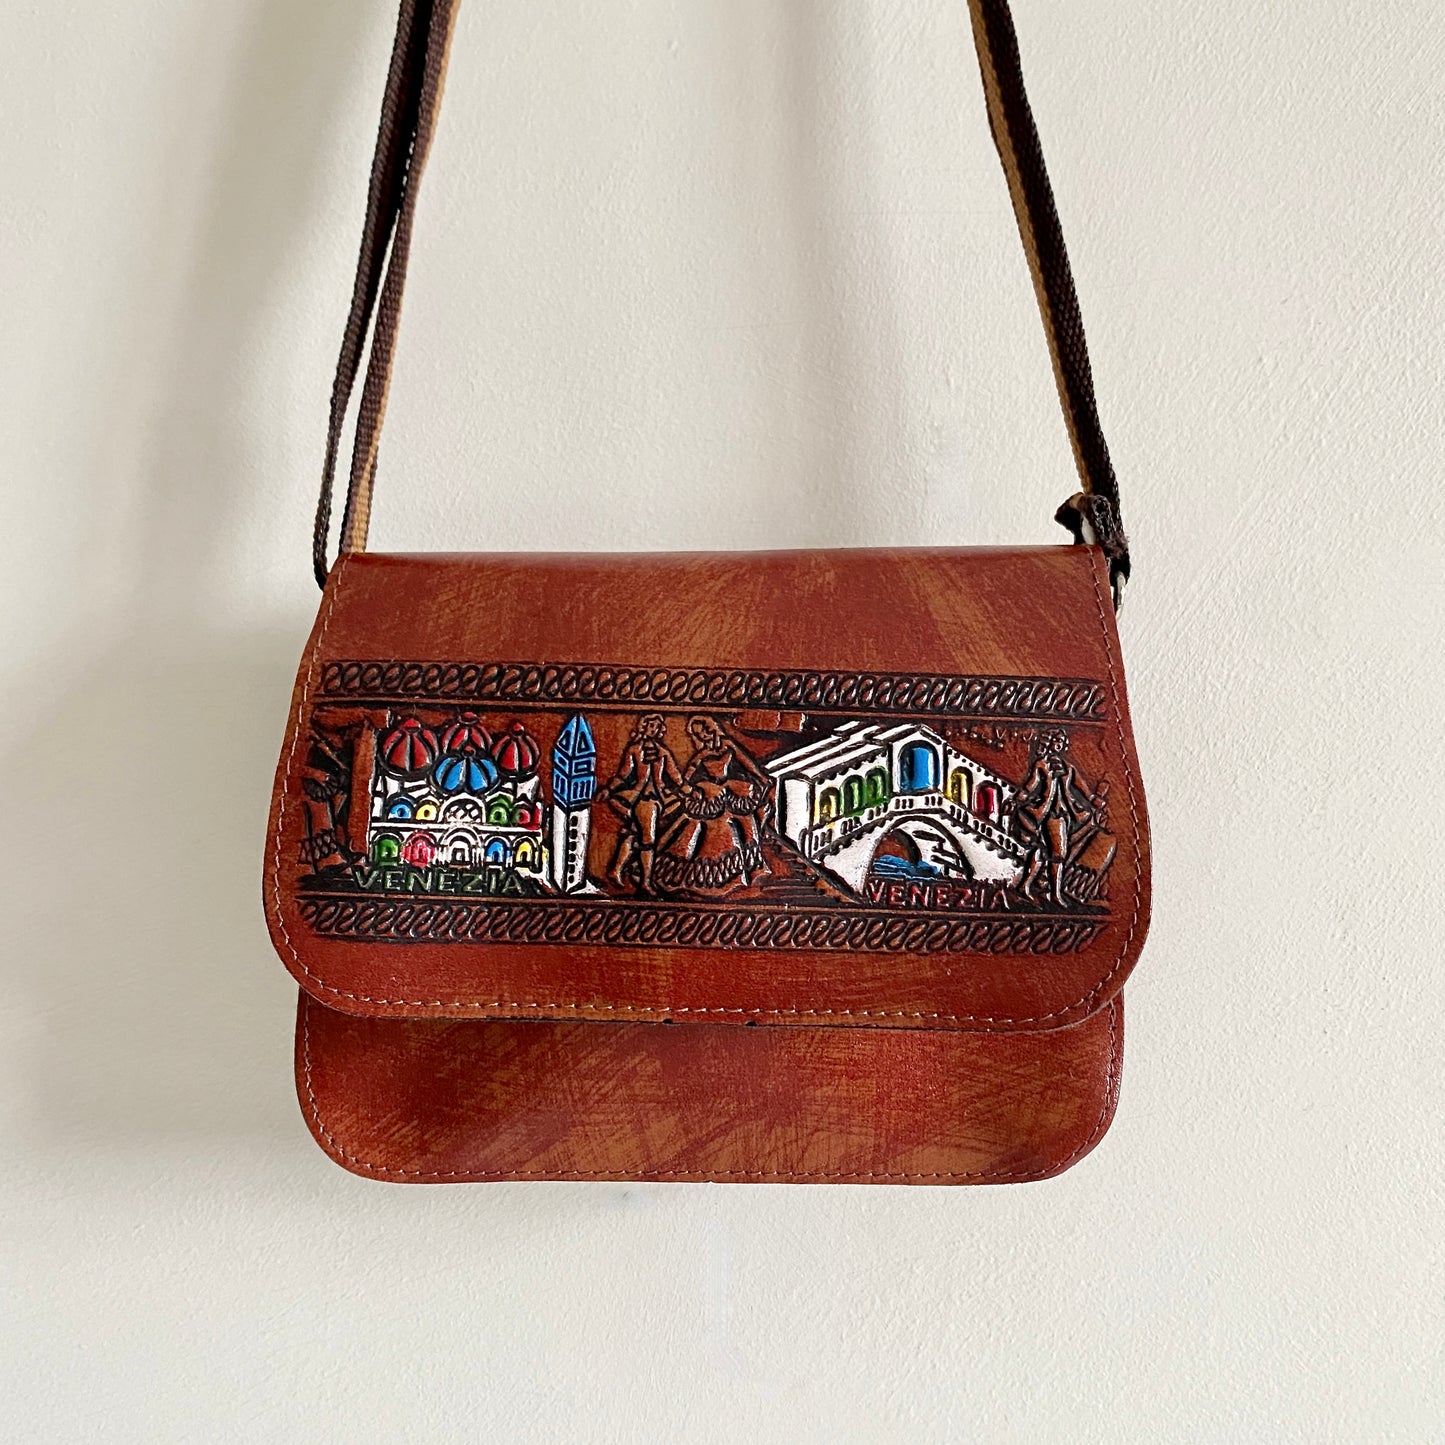 Vintage tan Venice 'tourist' bag Flap with press stud closure Hand tooled and hand painted detailing to front and back Adjustable fabric strap (measures 28"- 55") Two internal pockets with credit card slots Regenerated Leather Made in Italy